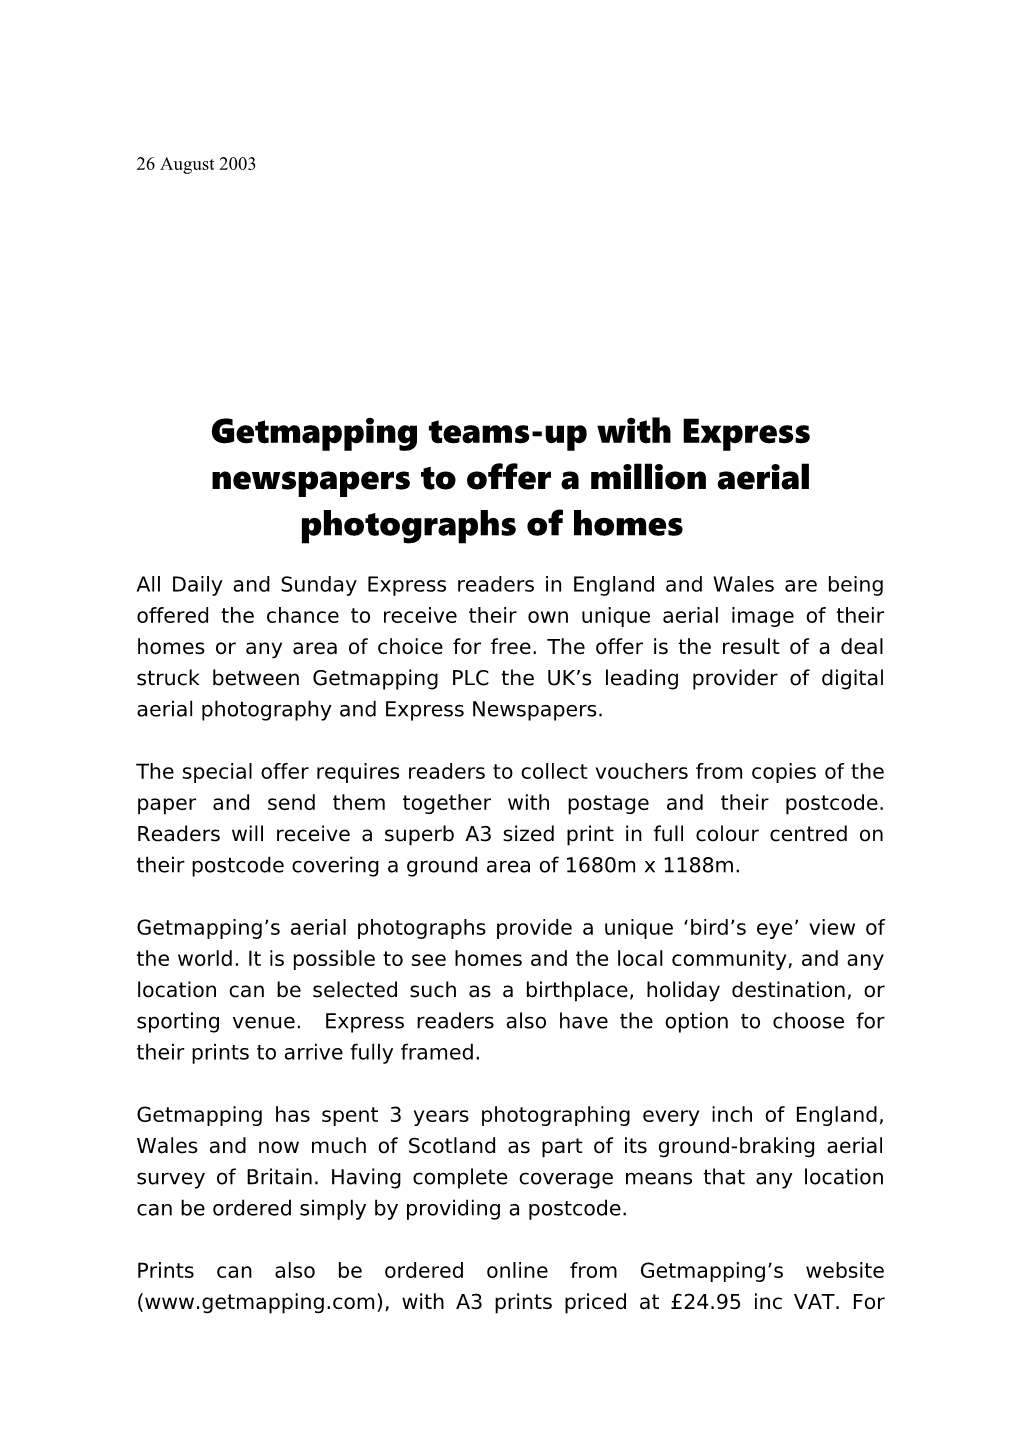 Getmapping Teams-Up with Express Newspapers to Offer a Million Aerial Photographs of Homes